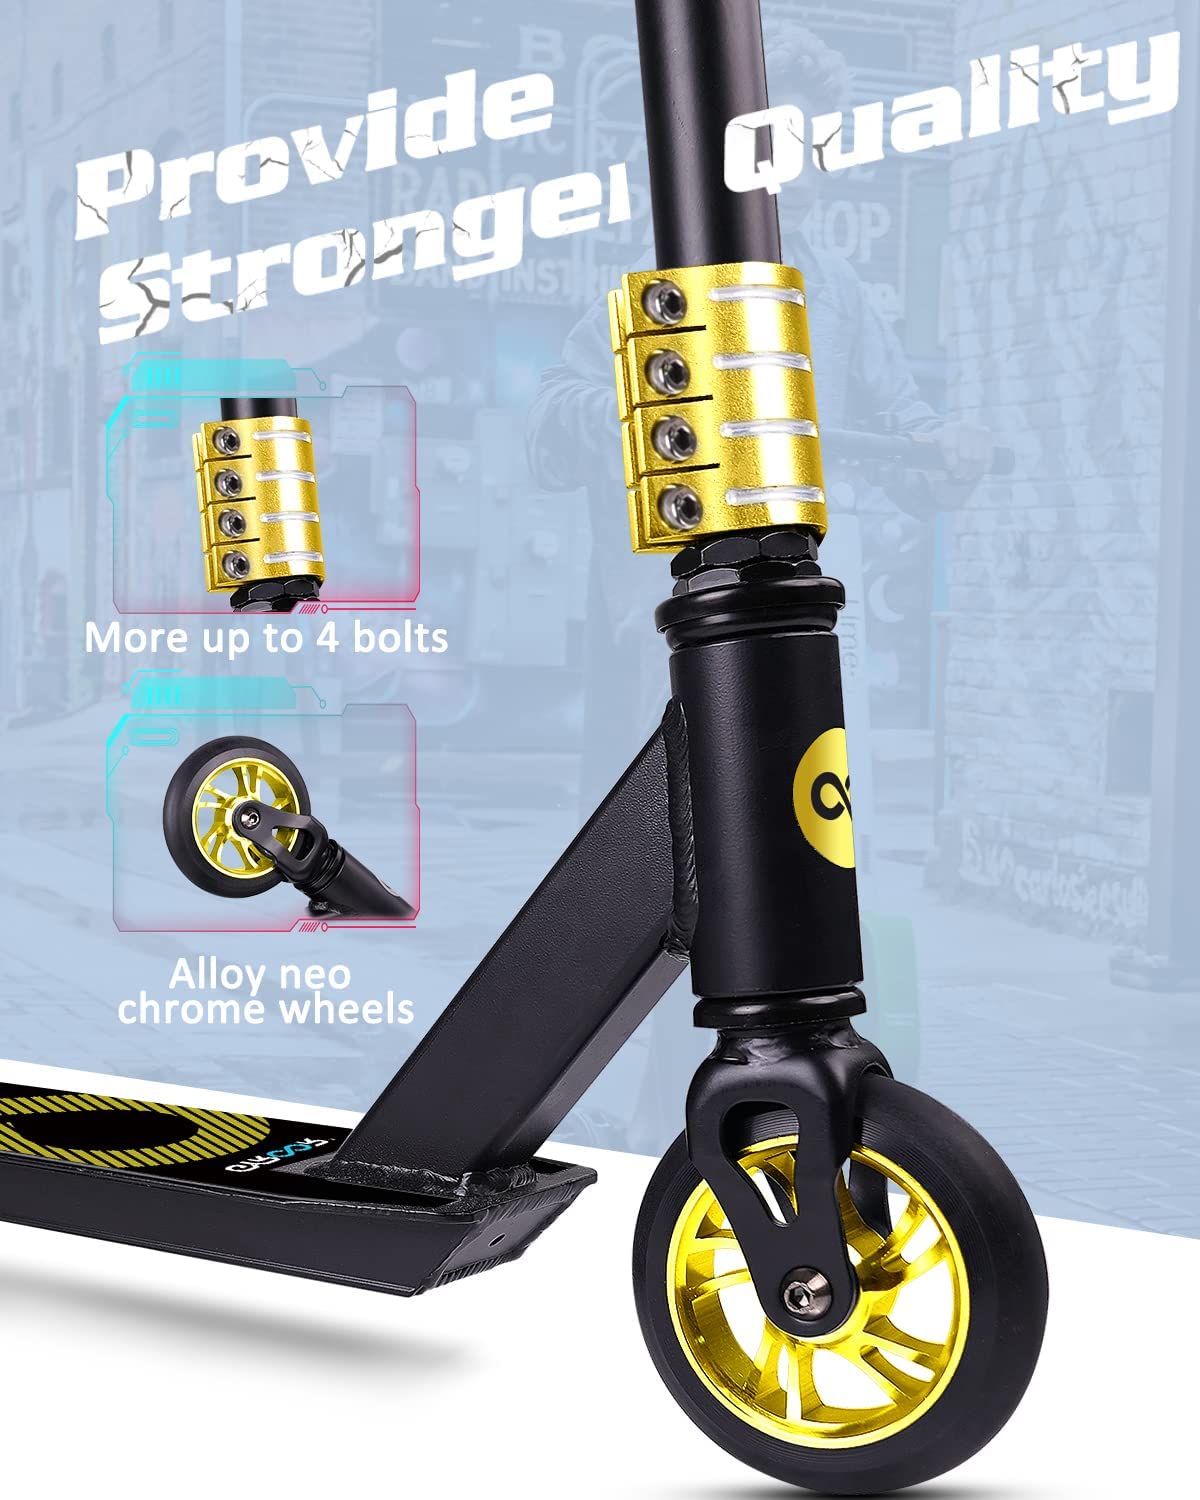 Pro scooter - stunt scooter - trick scooter - Gyroor Z1 scooter